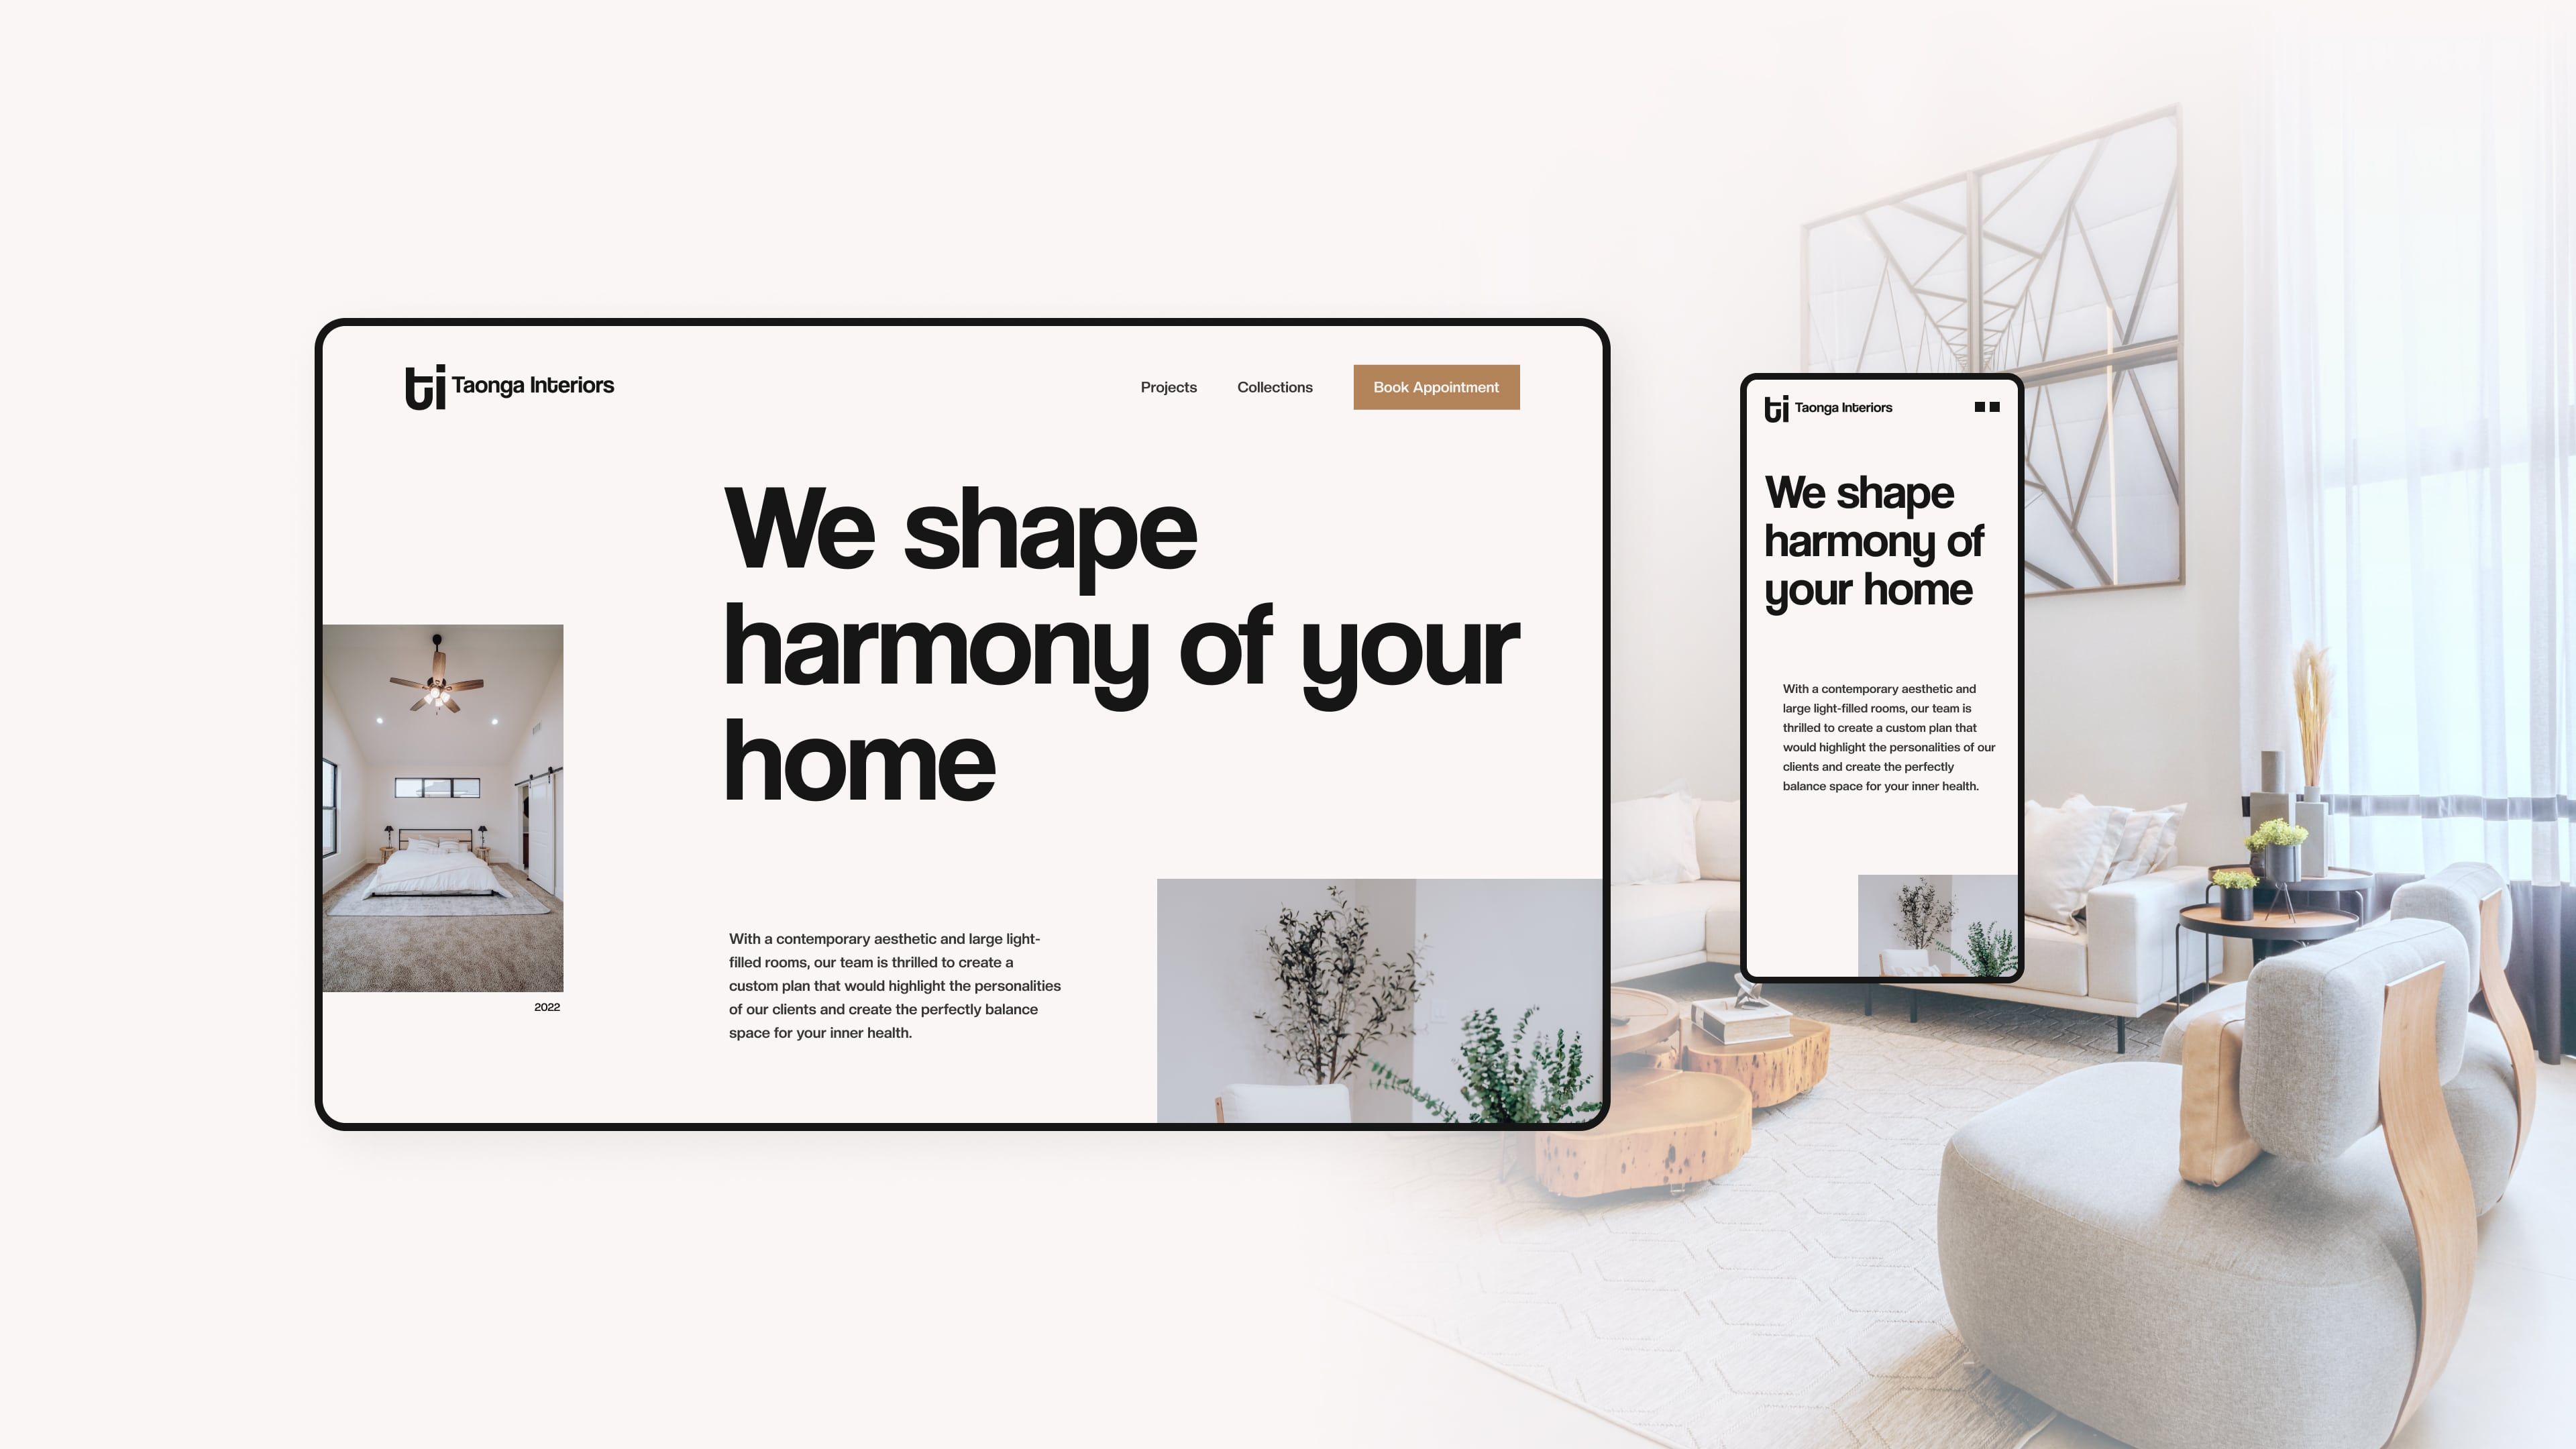 Design Mockup for section "We shape harmony of your home"